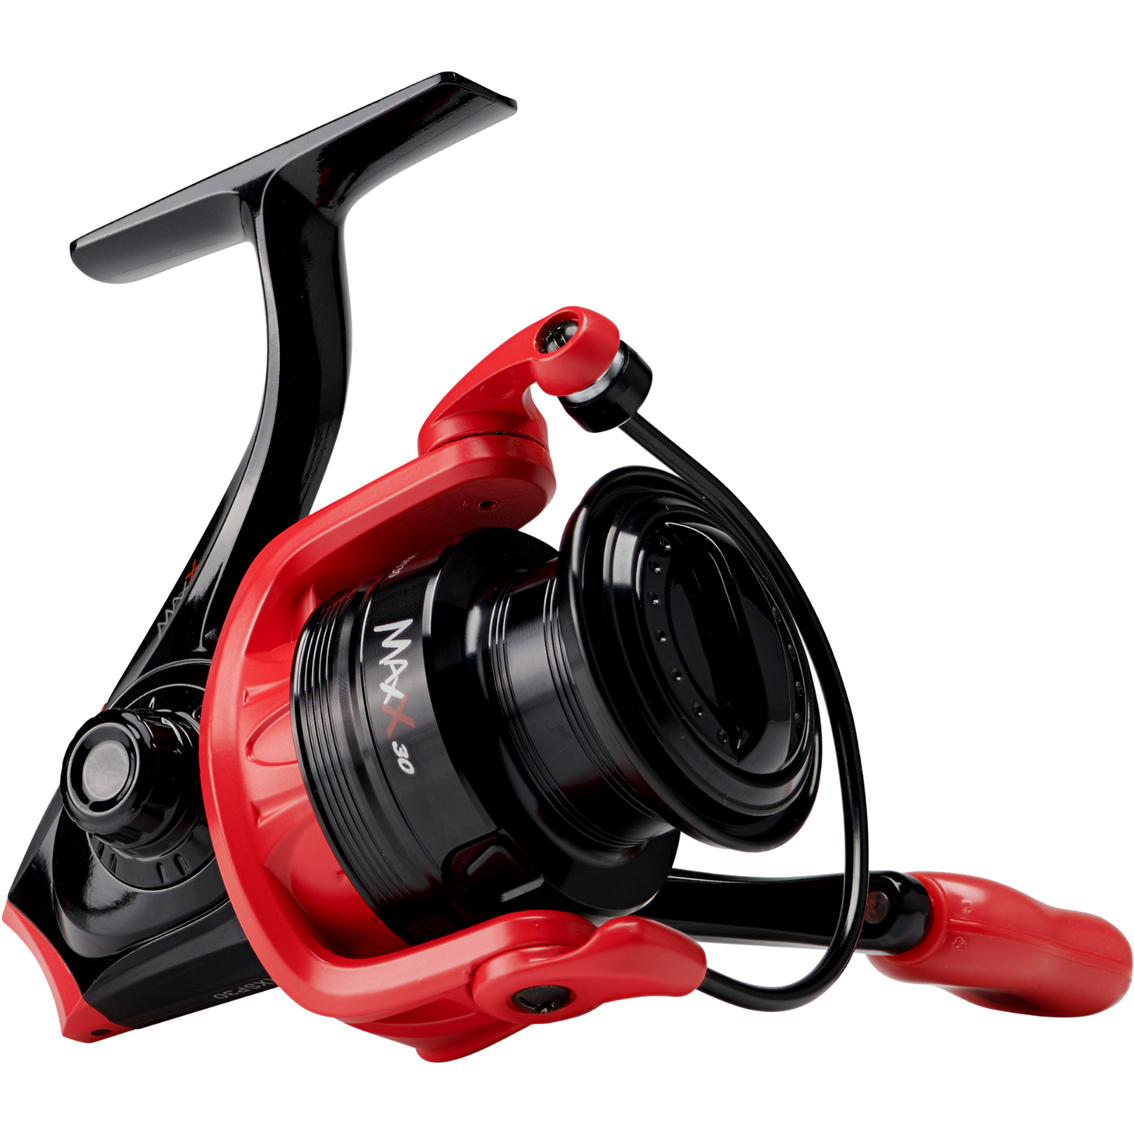 Abu Garcia Max X Spinning Reel, Saltwater Rods & Reels, Sports & Outdoors